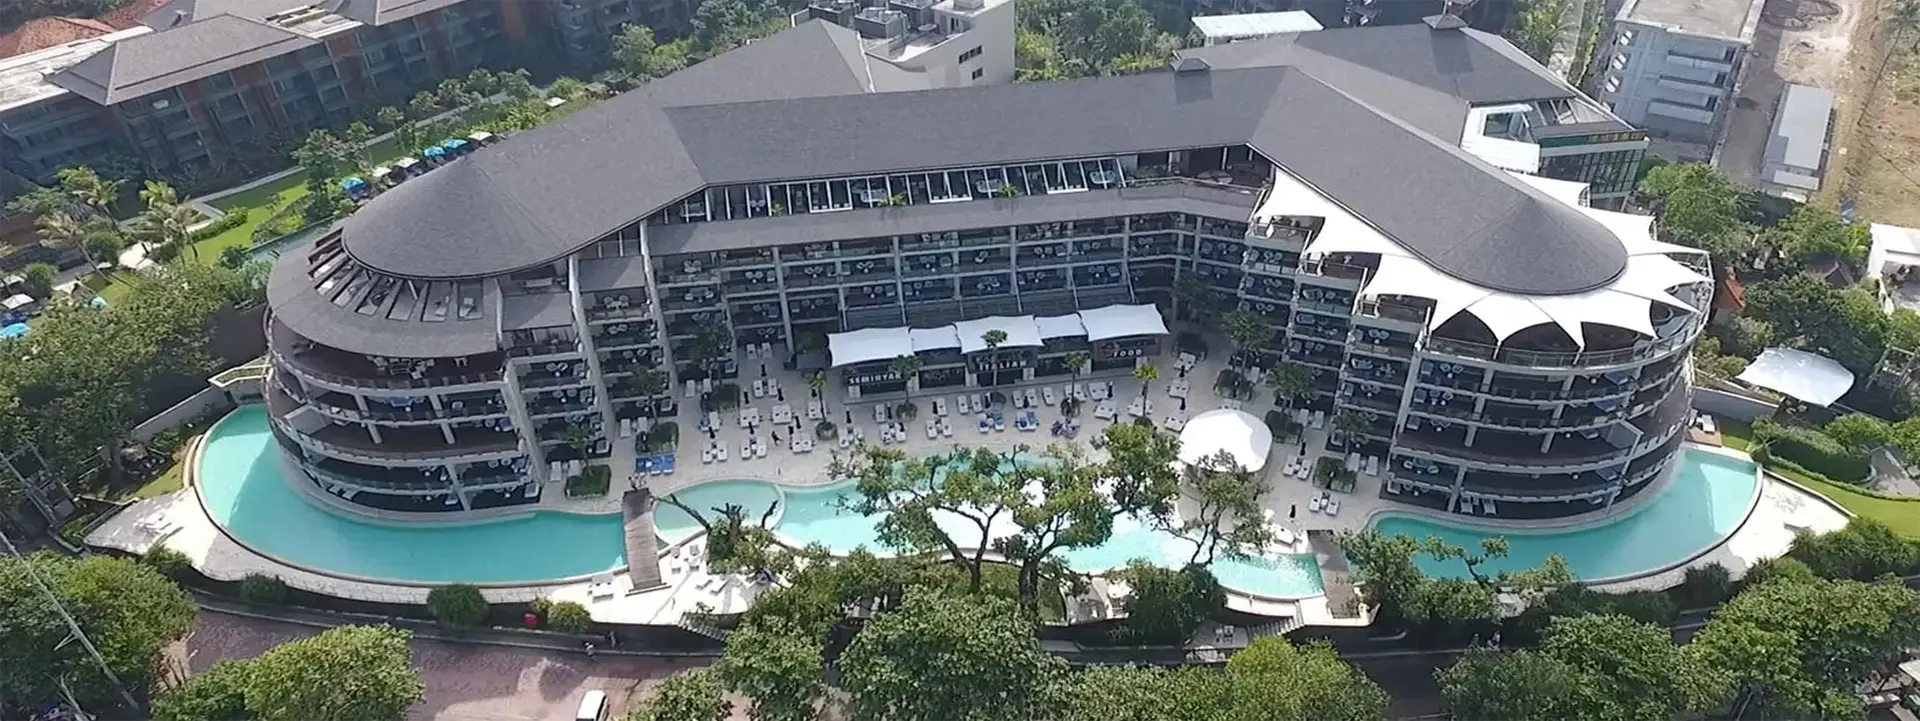 DOUBLE-SIX-LUXURY-HOTEL-SEMINYAK-BALI-holiday-deal-aerial-view